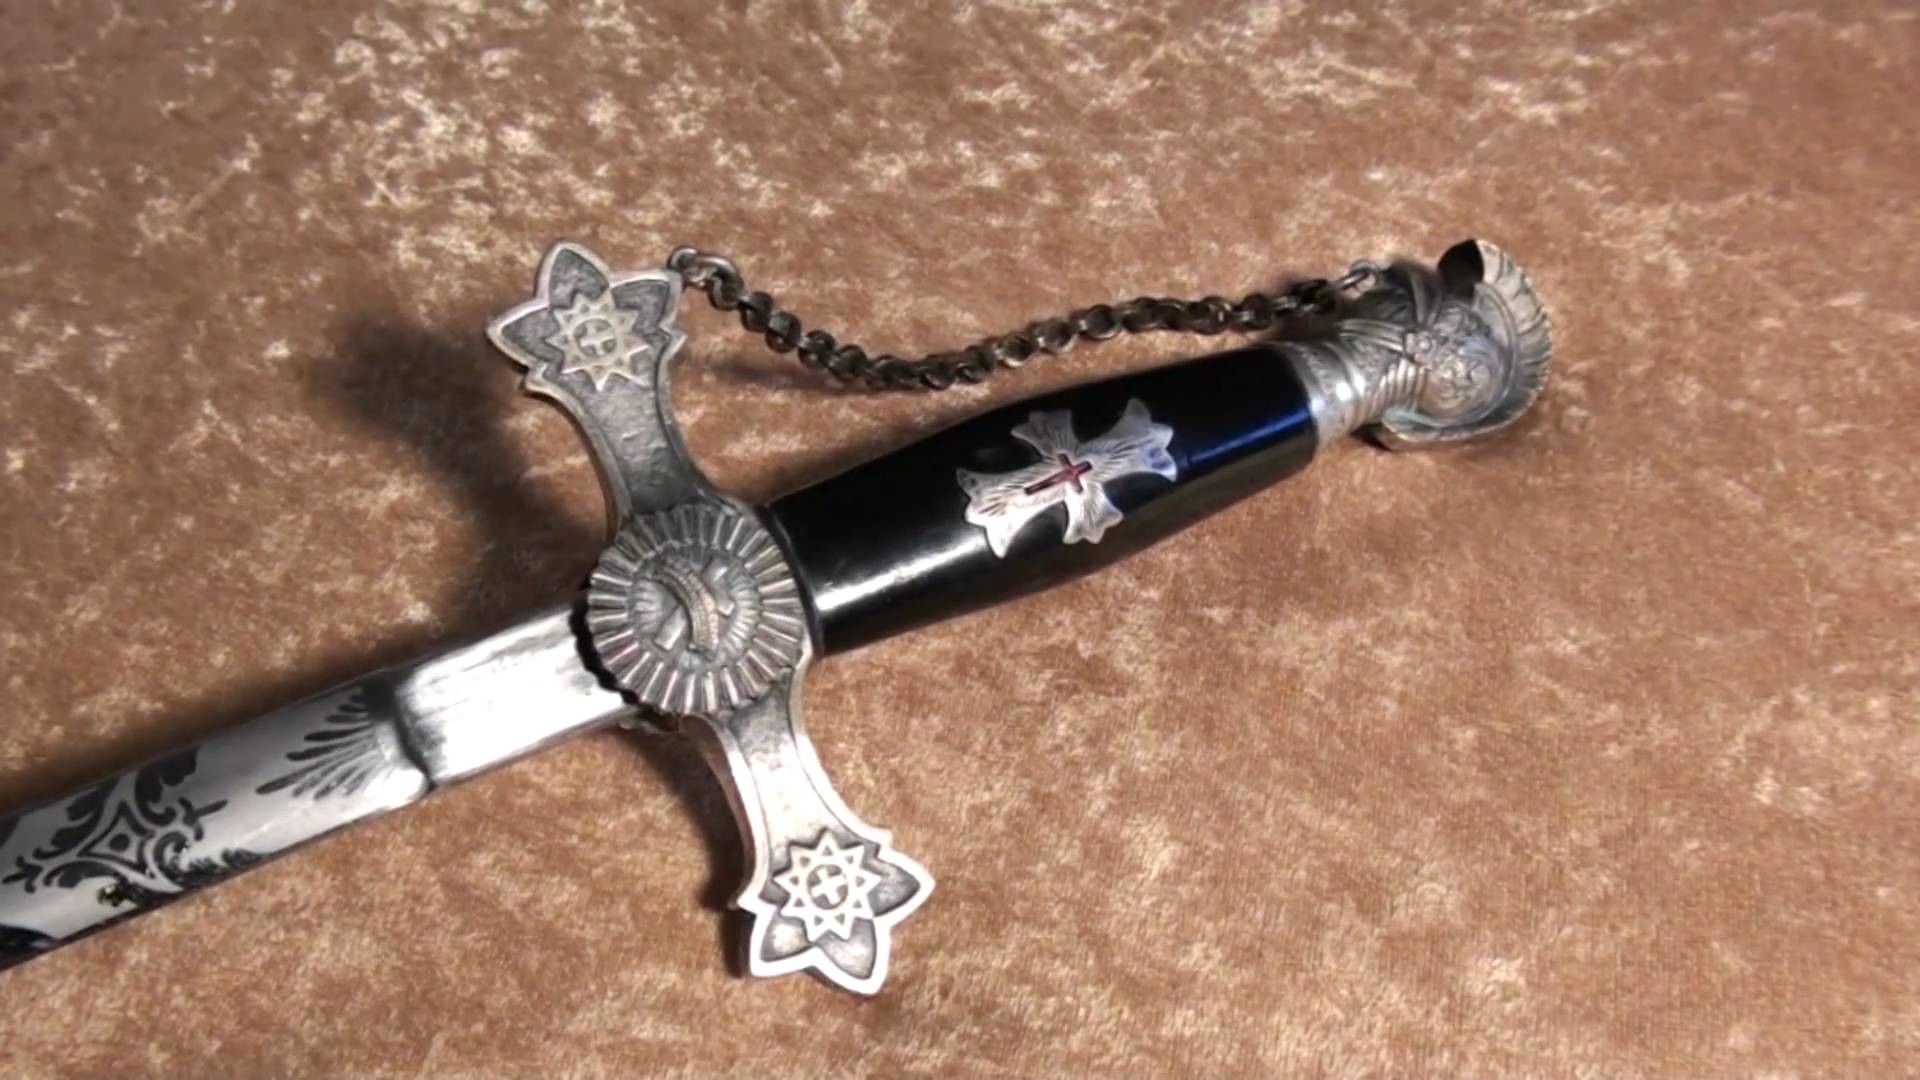 1920x1080 TheSwaggerplace Knights Templar Sword "Emri W Clark" Ames Sword Co  Chicoppee Mass 1897